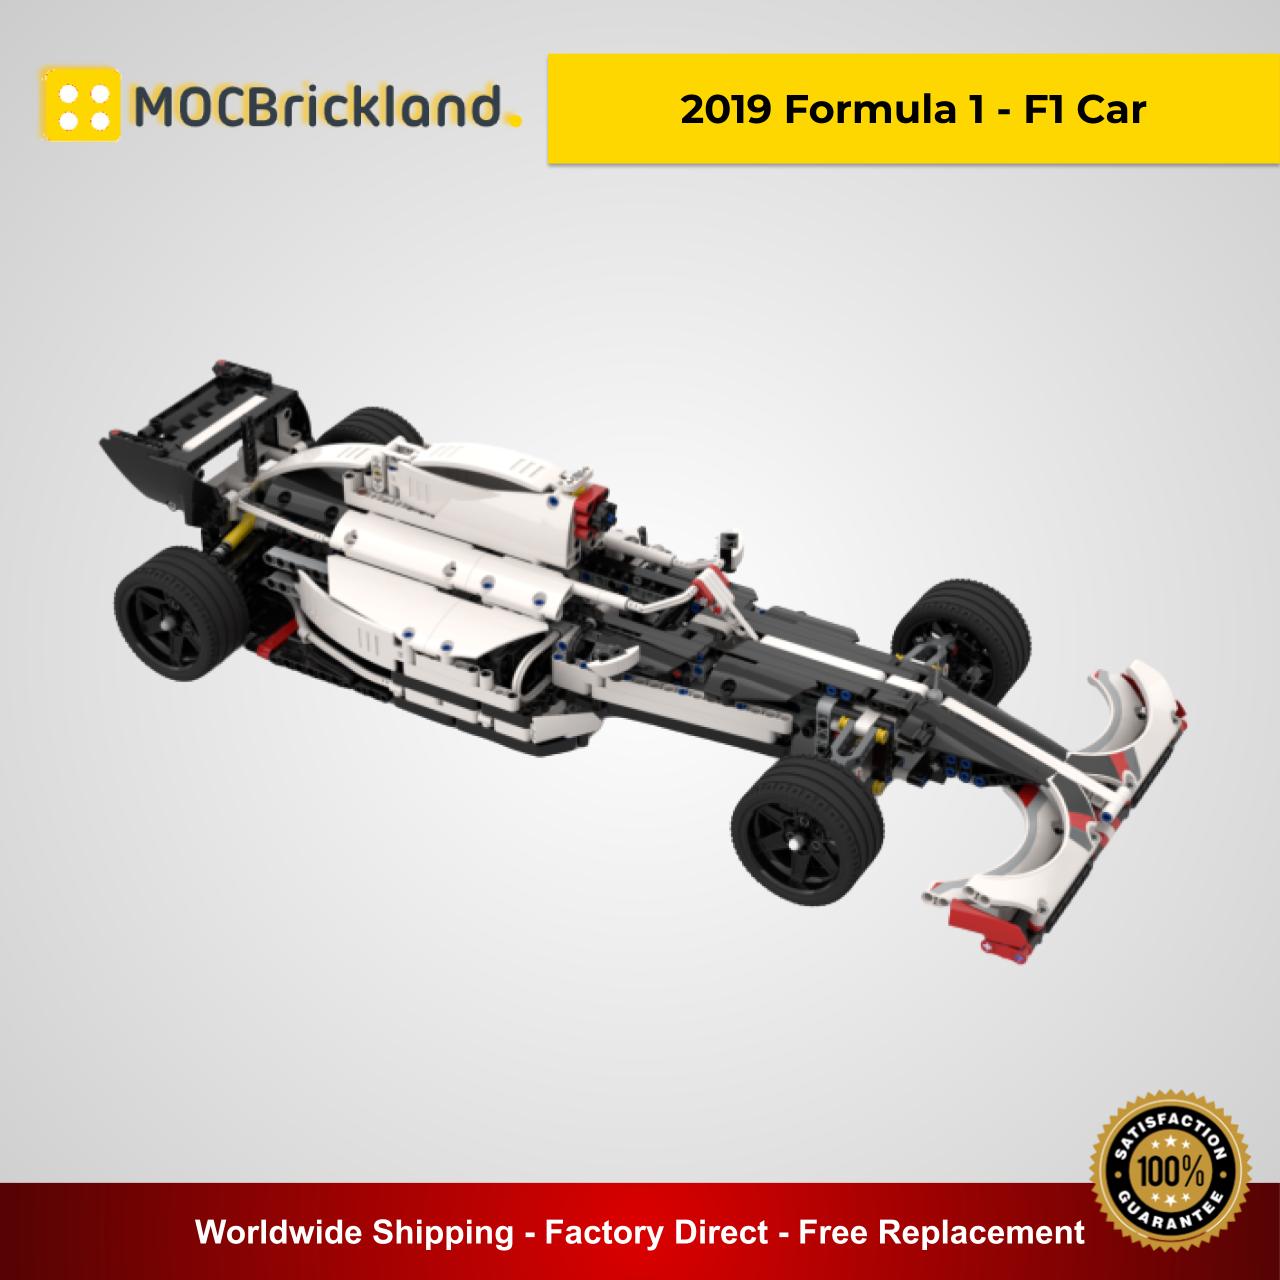 2019 Formula 1 - F1 Car MOC 31079 Technic Compatible With LEGO 42096 Designed By GeyserBricks With 1236 Pieces